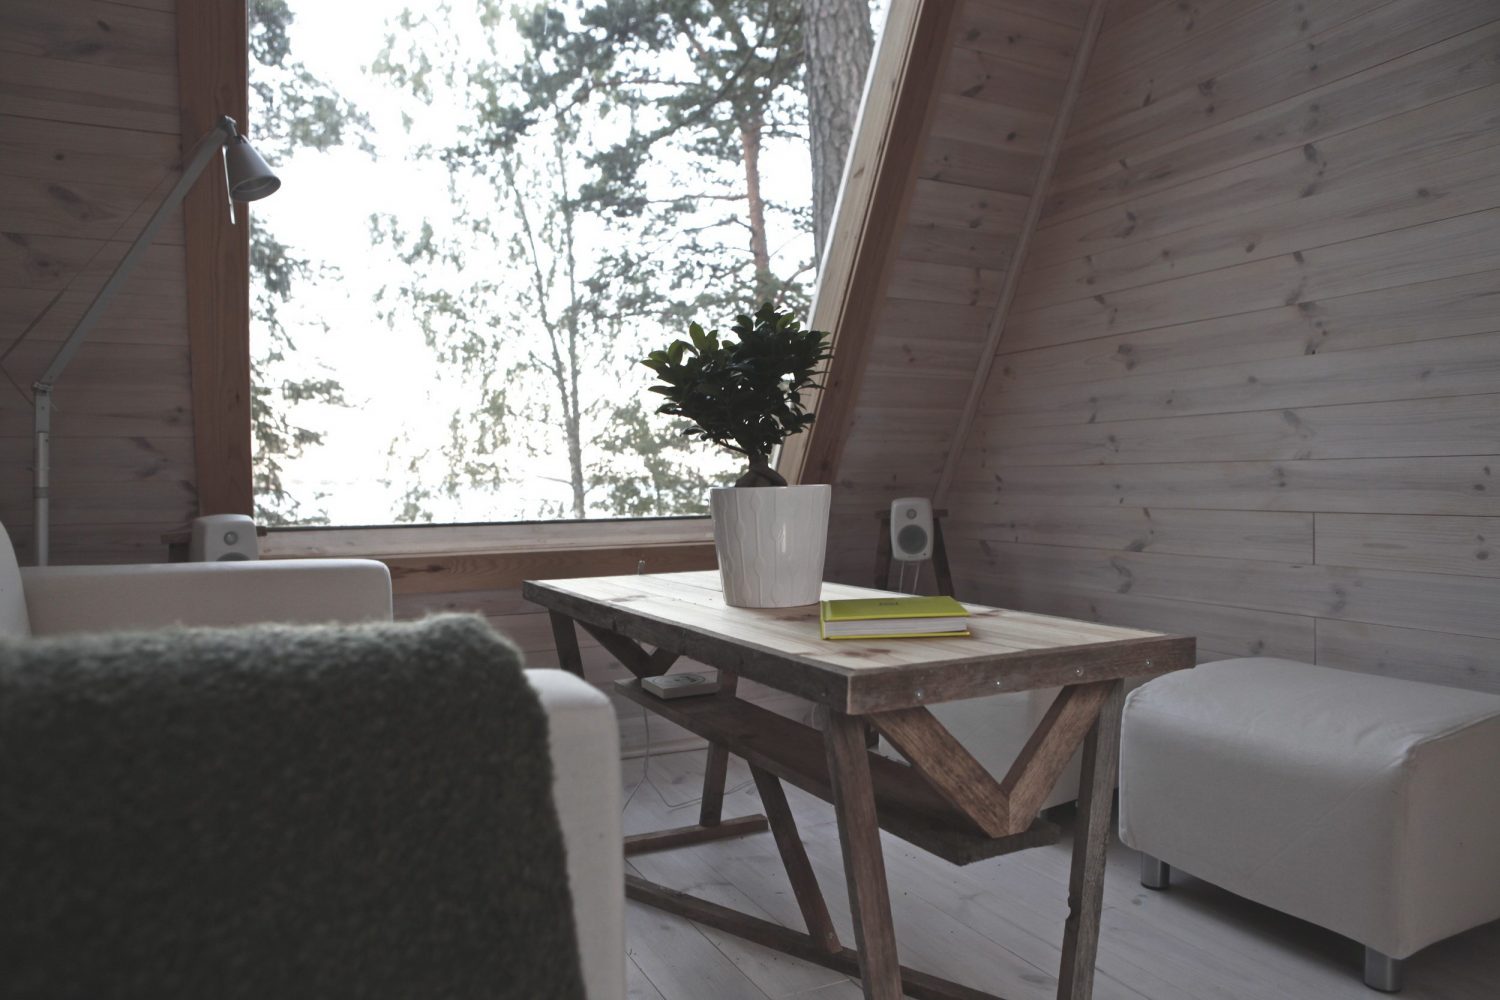 Nido | Tiny Cabin in the Finnish Woods by Robin Falck